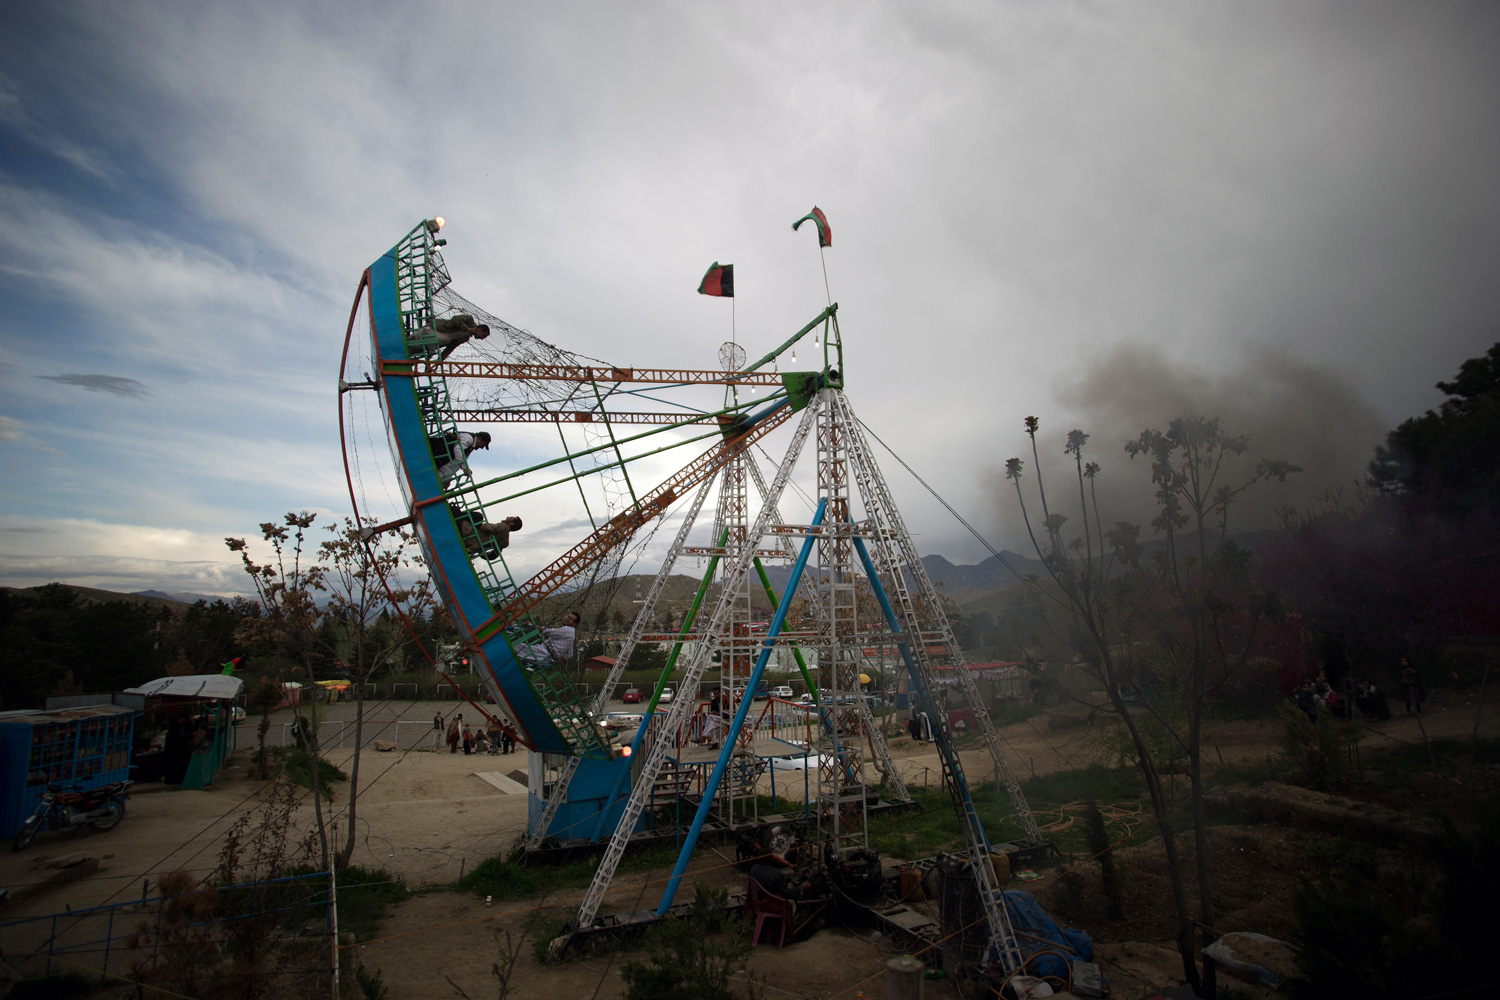 April 27, 2012. Afghans sit on a fairground boat swing ride in Band-e-Qargha Gulestan Park in Kabul.